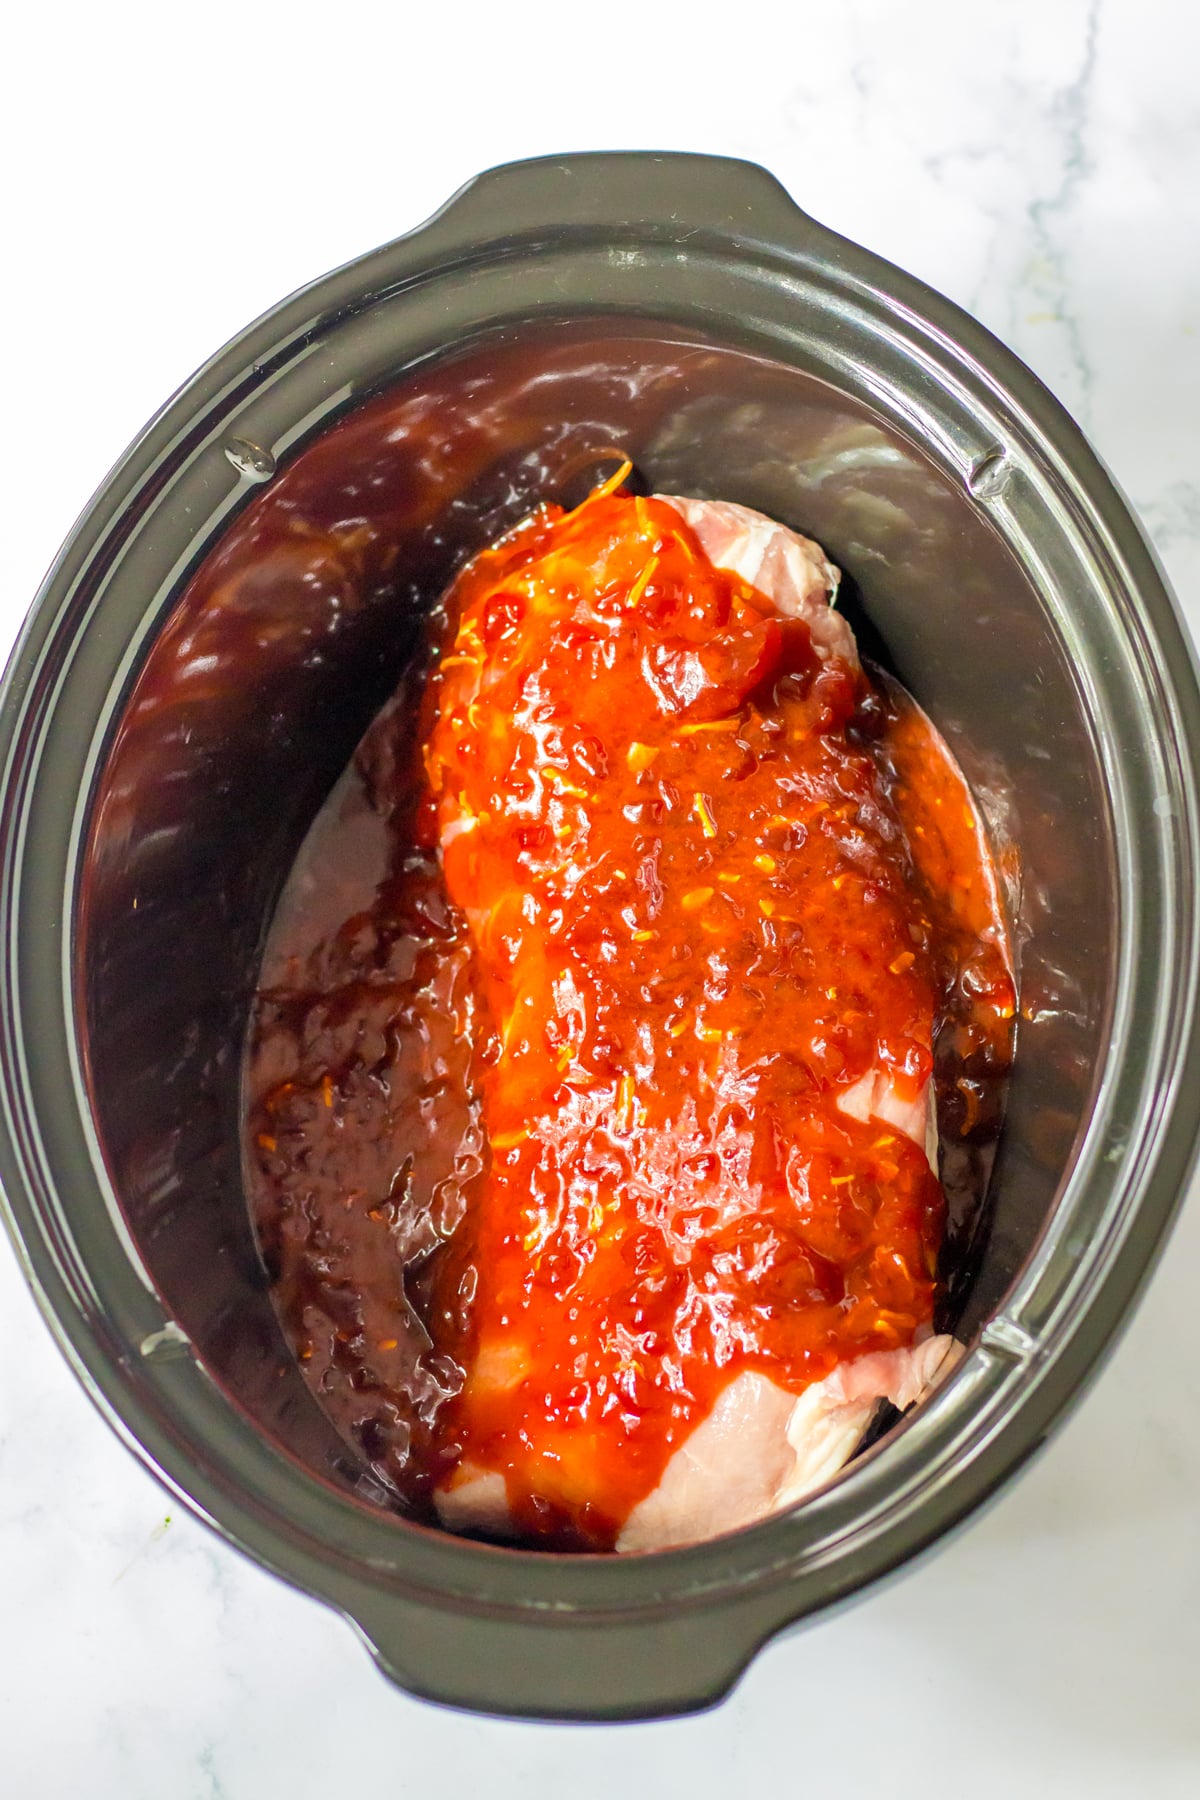 Adding cranberry sauce over pork in a slow cooker.